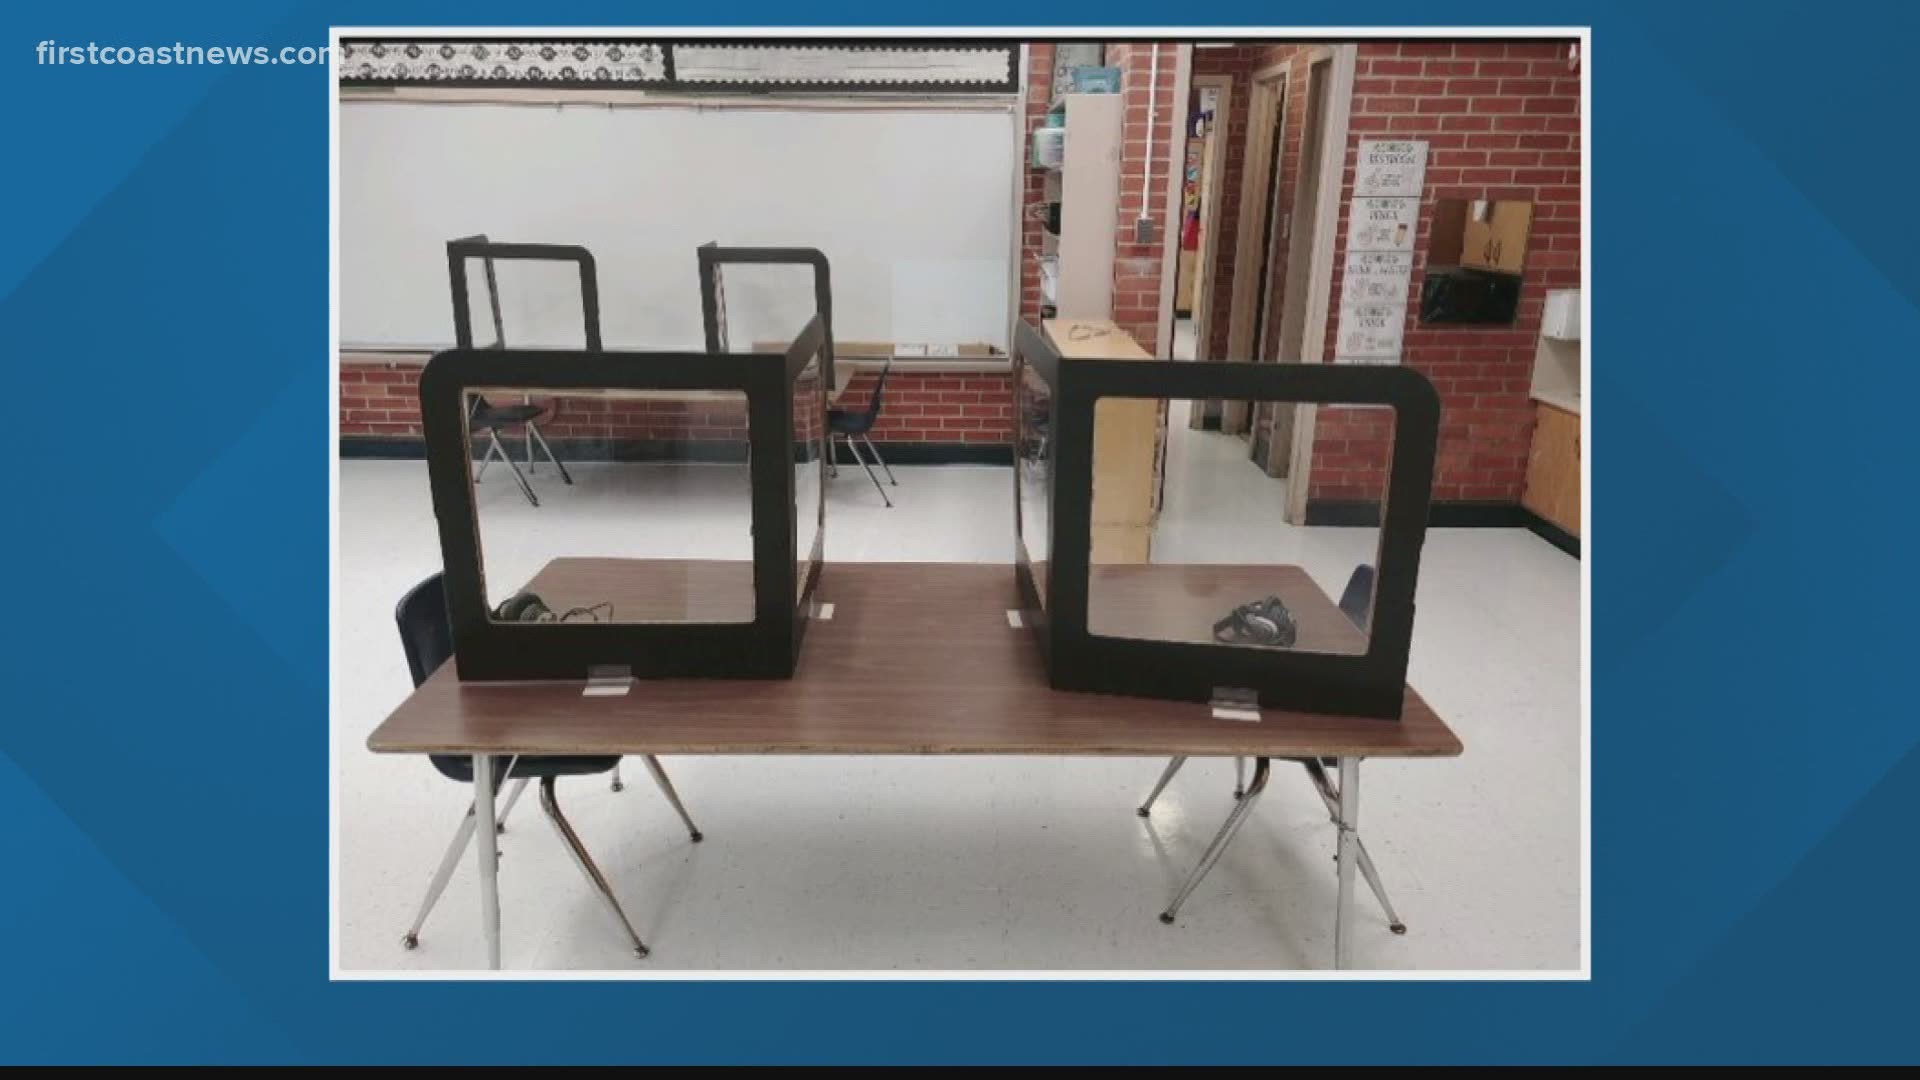 Some parents are happy with Duval County Public Schools’ decision to install plastic barriers in classrooms to help prevent the spread of COVID-19.